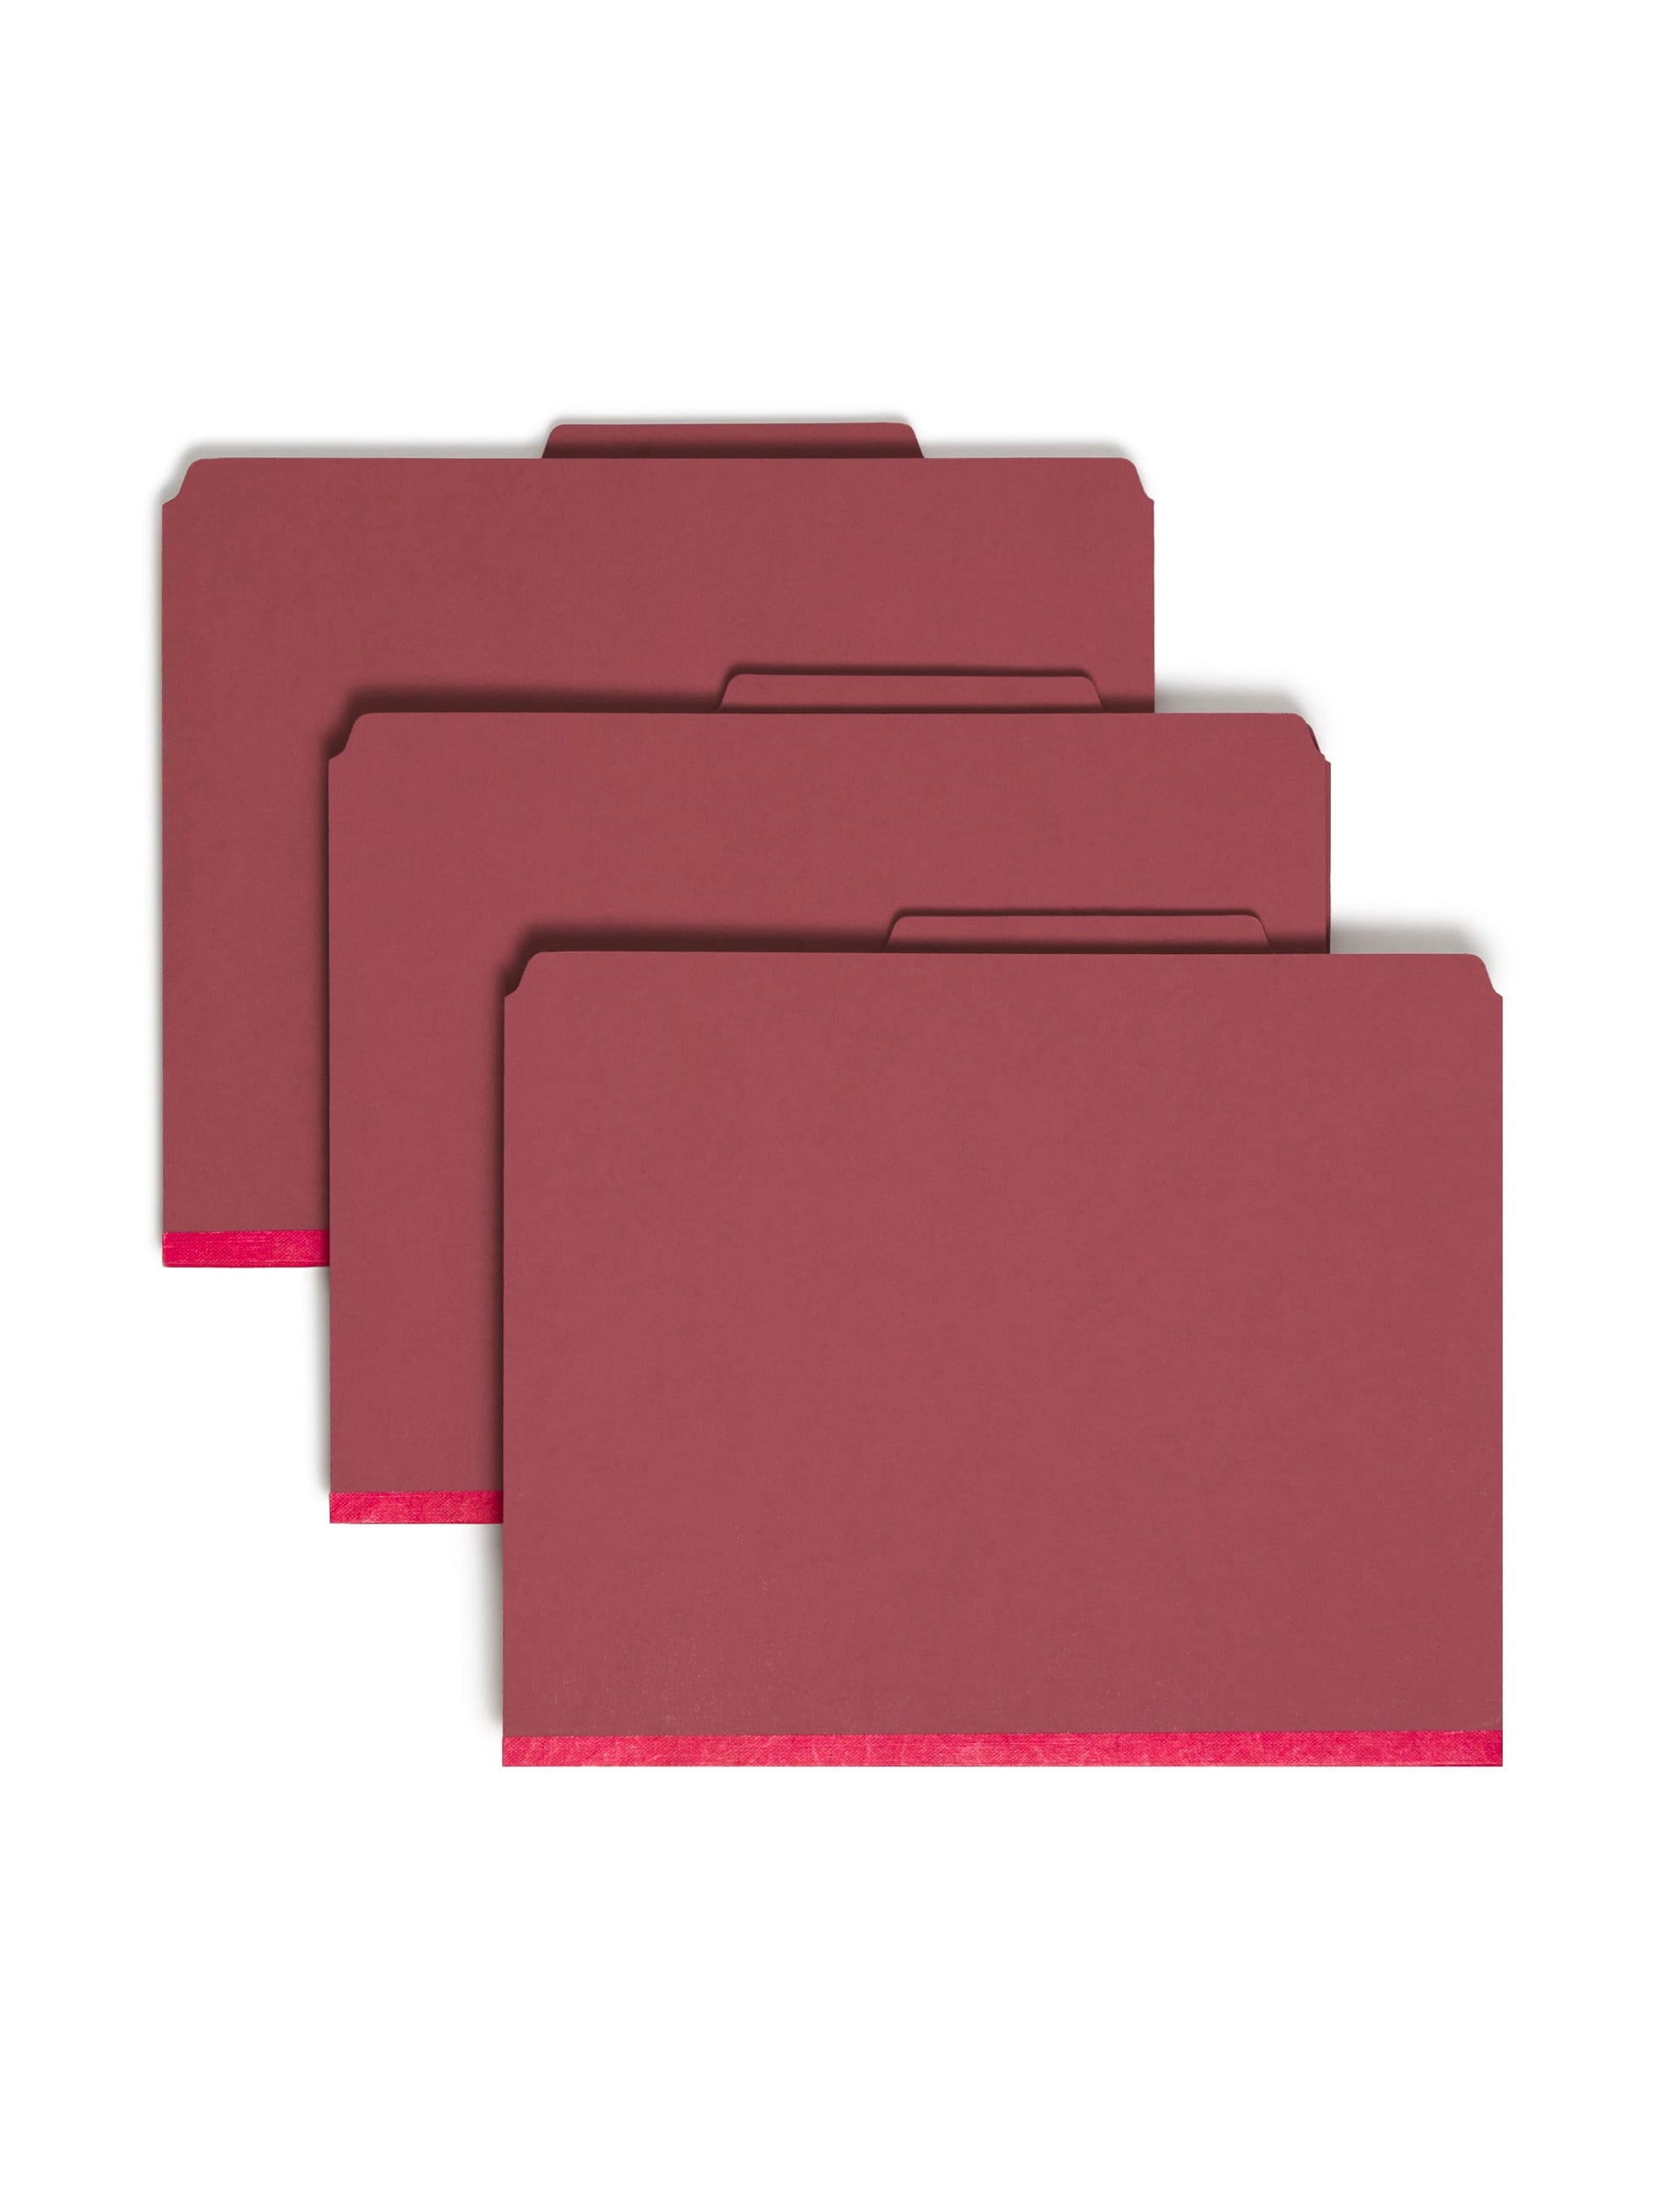 SafeSHIELD® Pressboard Classification File Folders with Pocket Dividers, Bright Red Color, Letter Size, Set of 0, 30086486140820